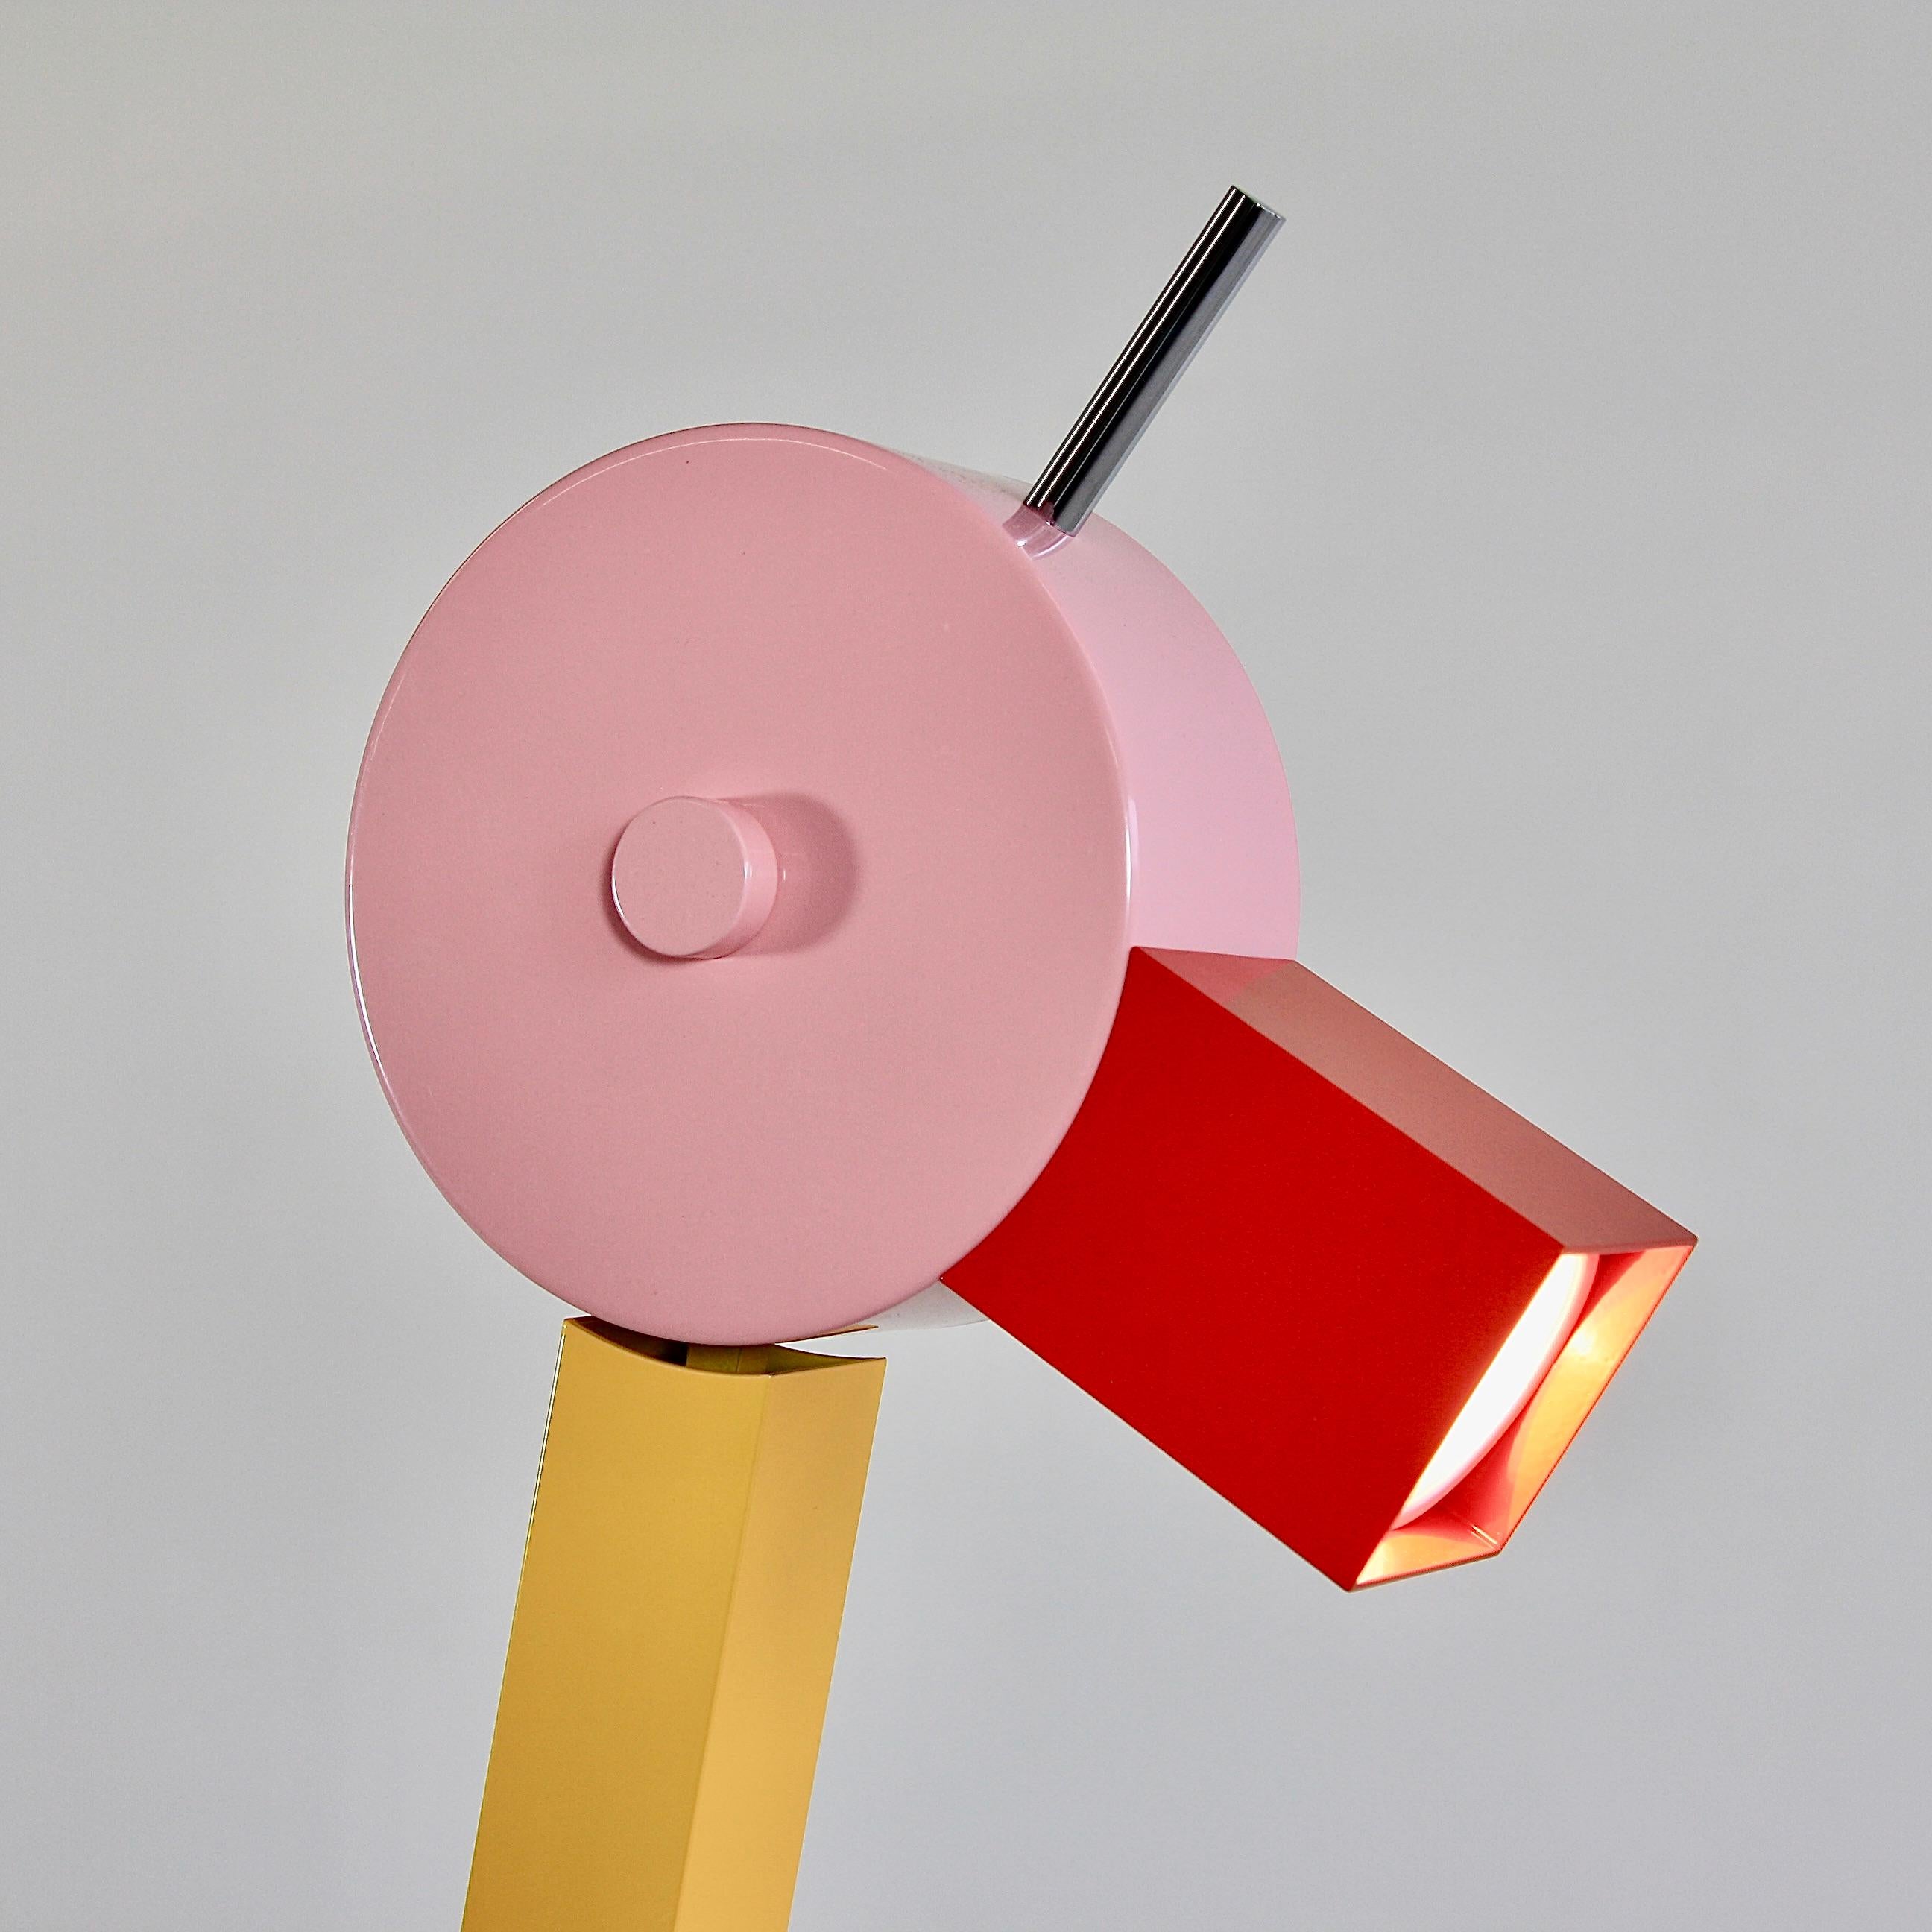 TAHITI table lamp, designed by Ettore Sottsass. Italy, 1981.

Metal construction, wooden base with laminate and head with halogen lamp, 'The Duck'. With original metal label.

Reference: Fiell. 1000 Lights. 1960 to present. P. 316,